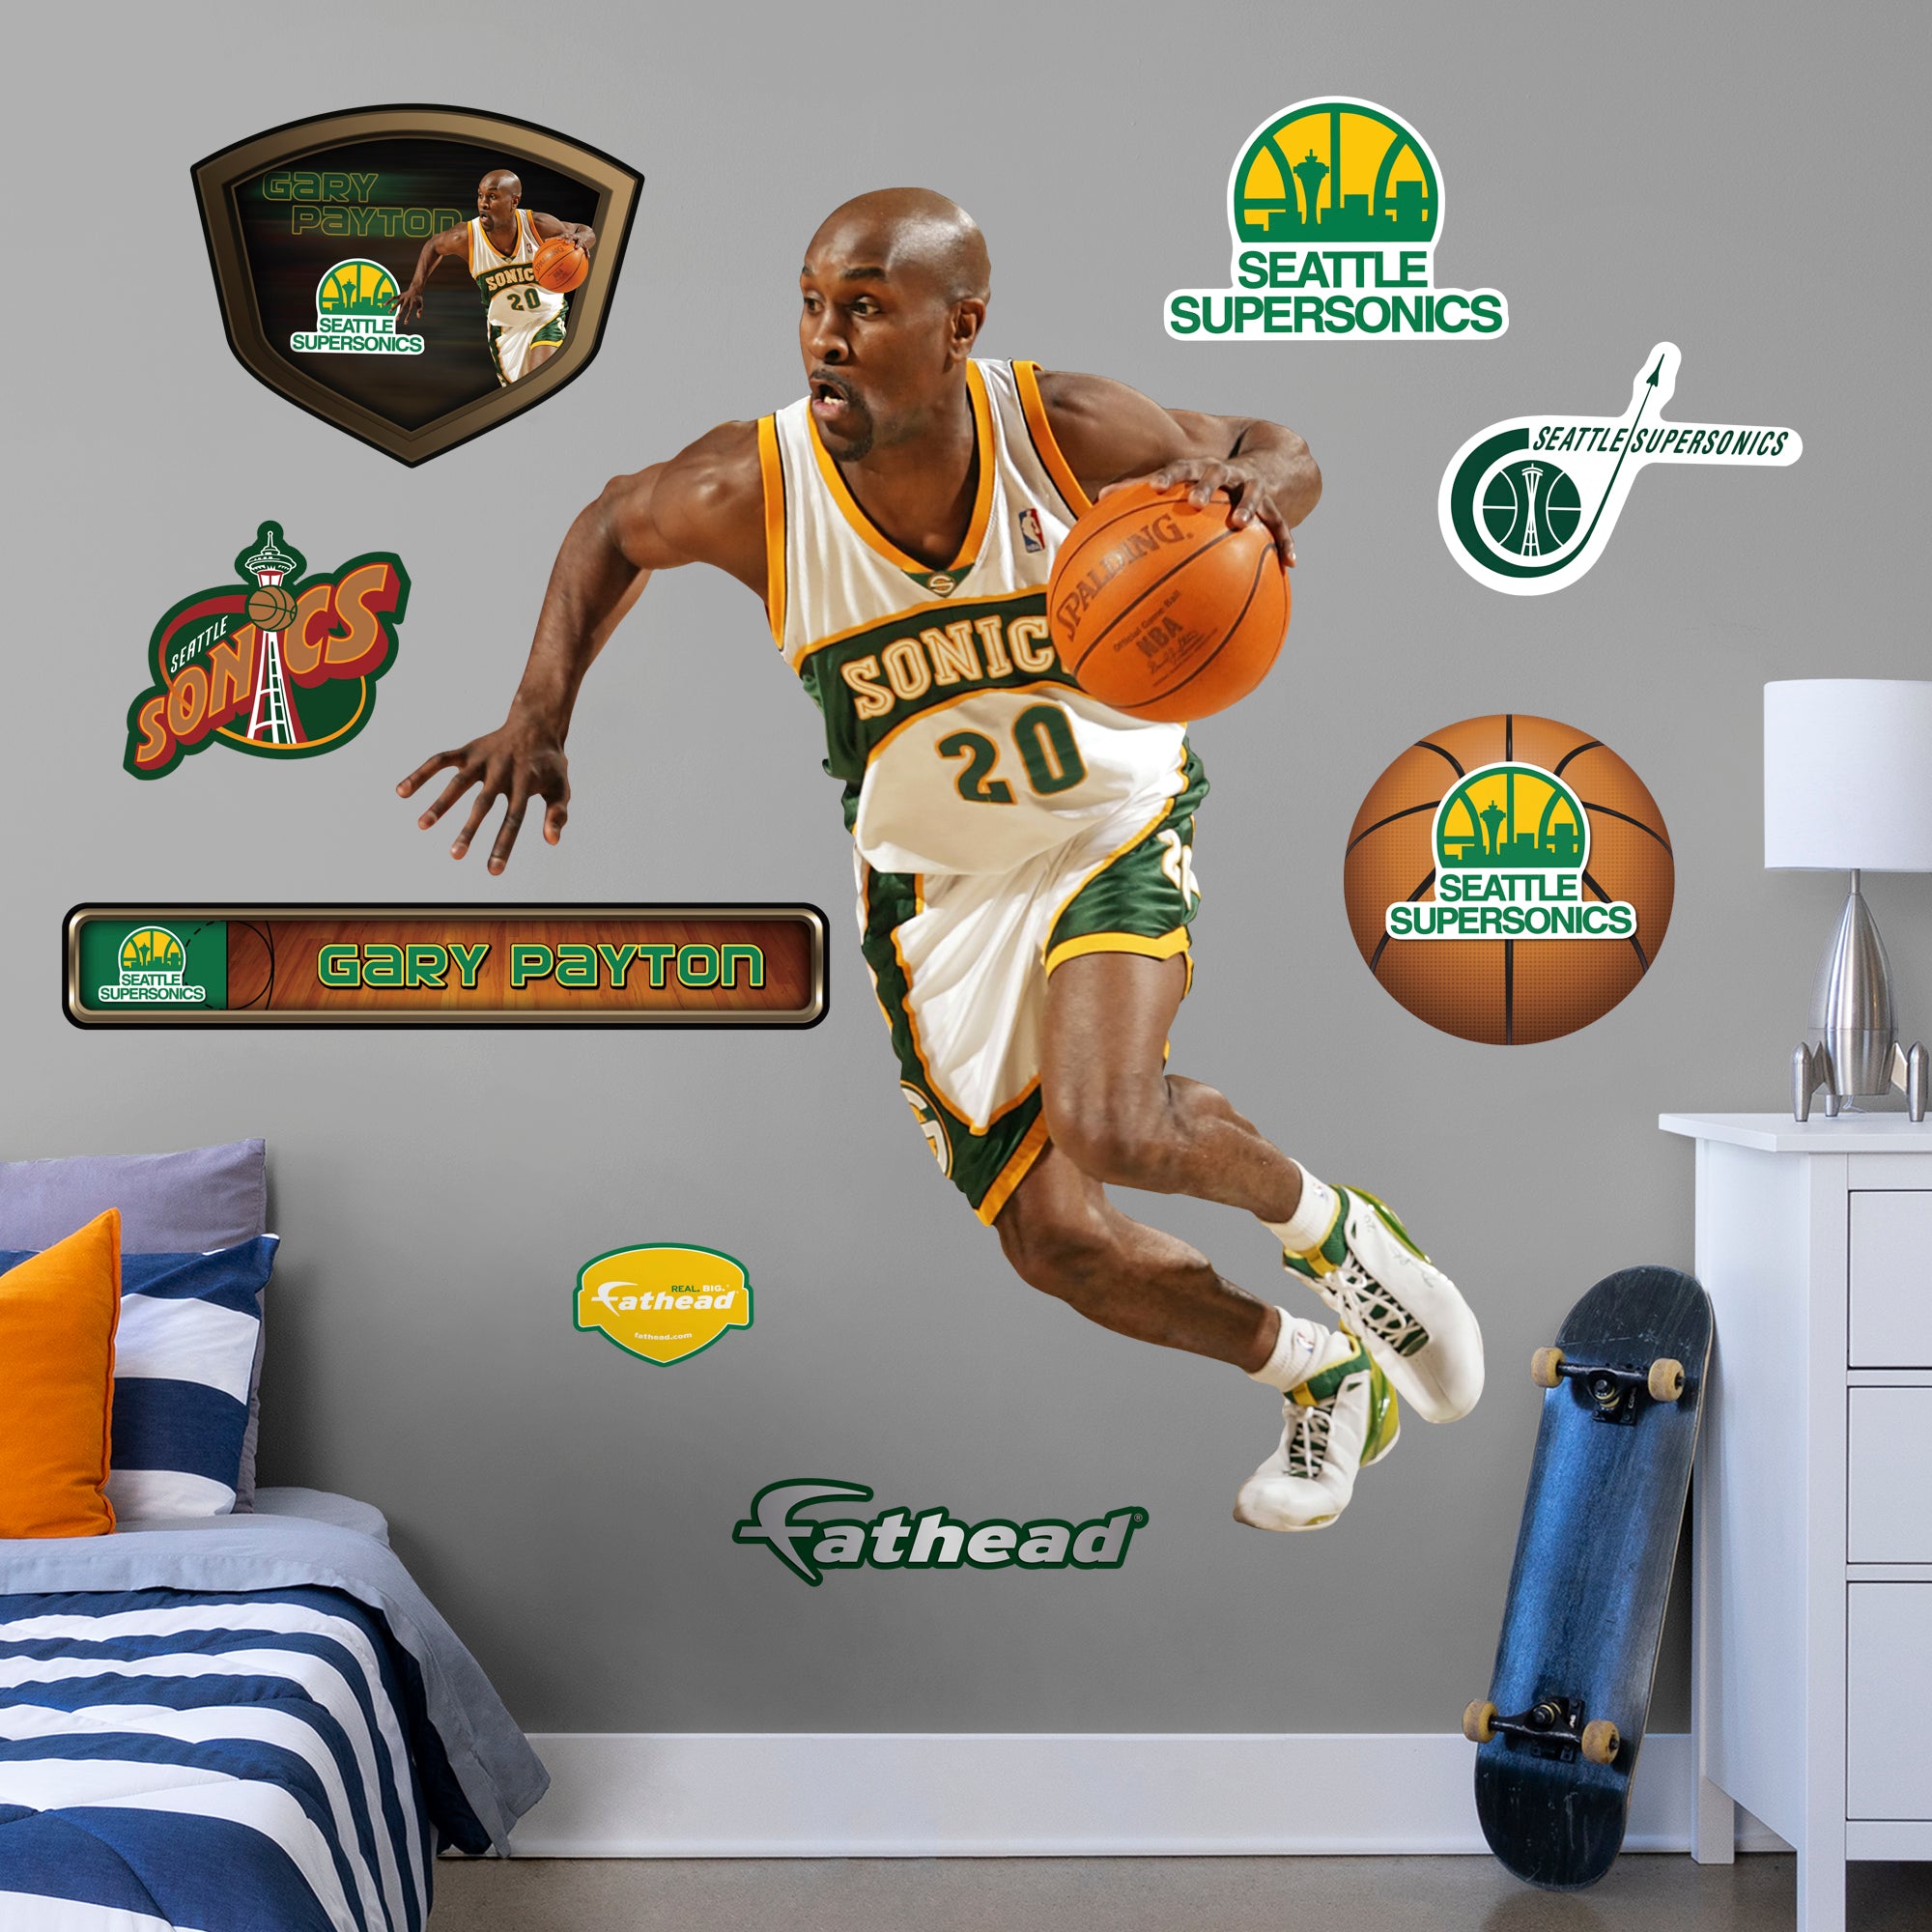 Gary Payton Legend - Officially Licensed NBA Removable Wall Decal Life-Size Athlete + 9 Decals (54"W x 67"H) by Fathead | Vinyl